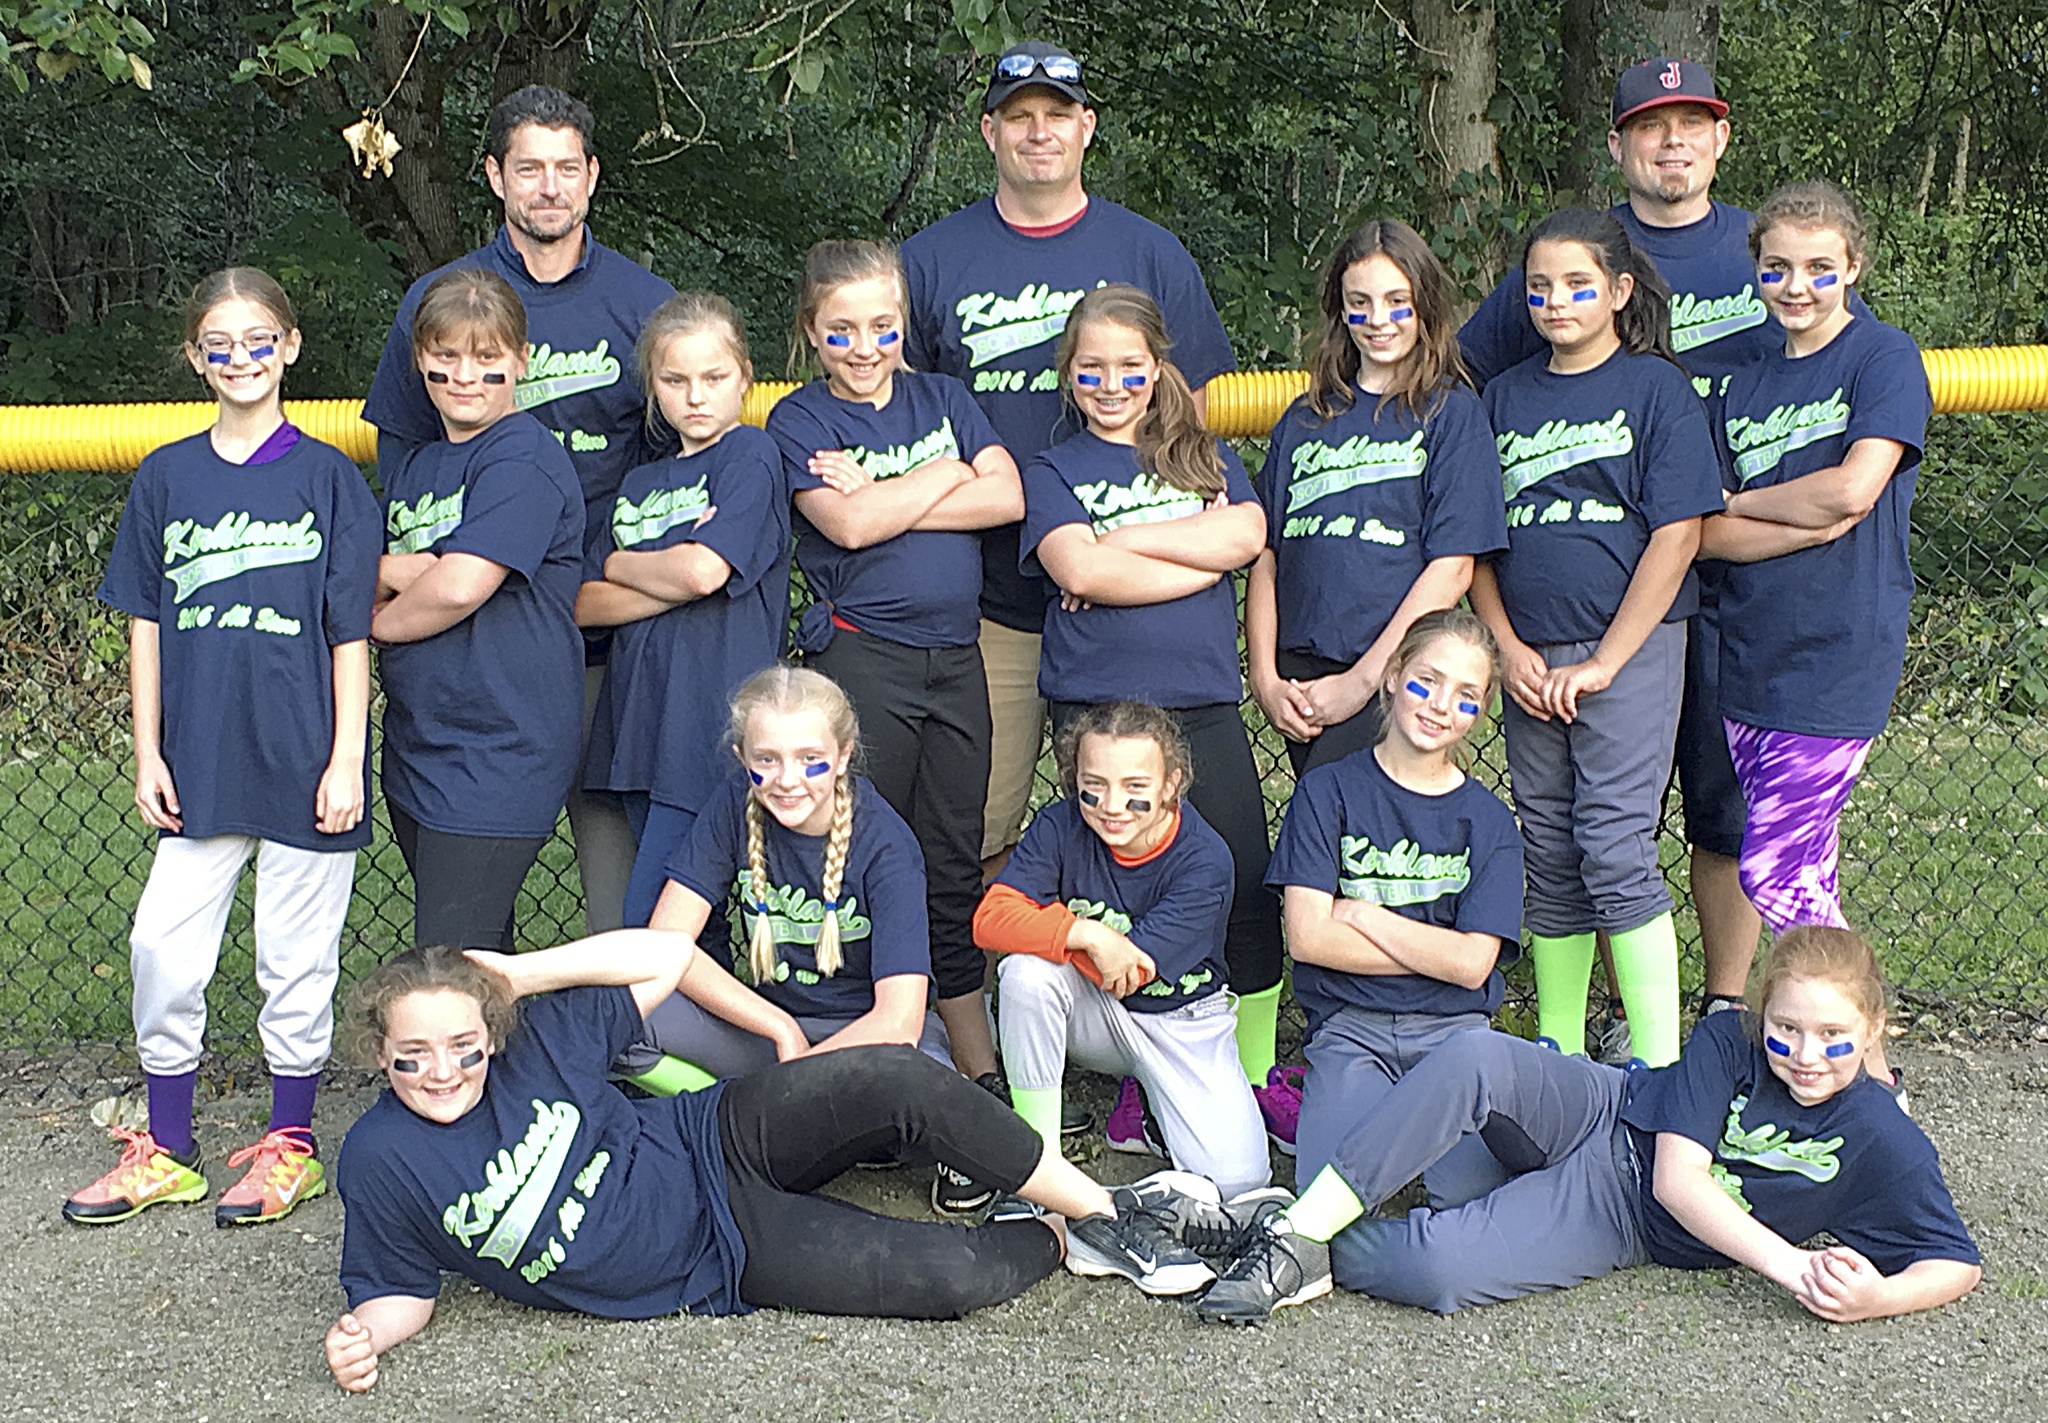 The Kirkland Softball 9- and 10-year-old All-Stars. - Contributed photo